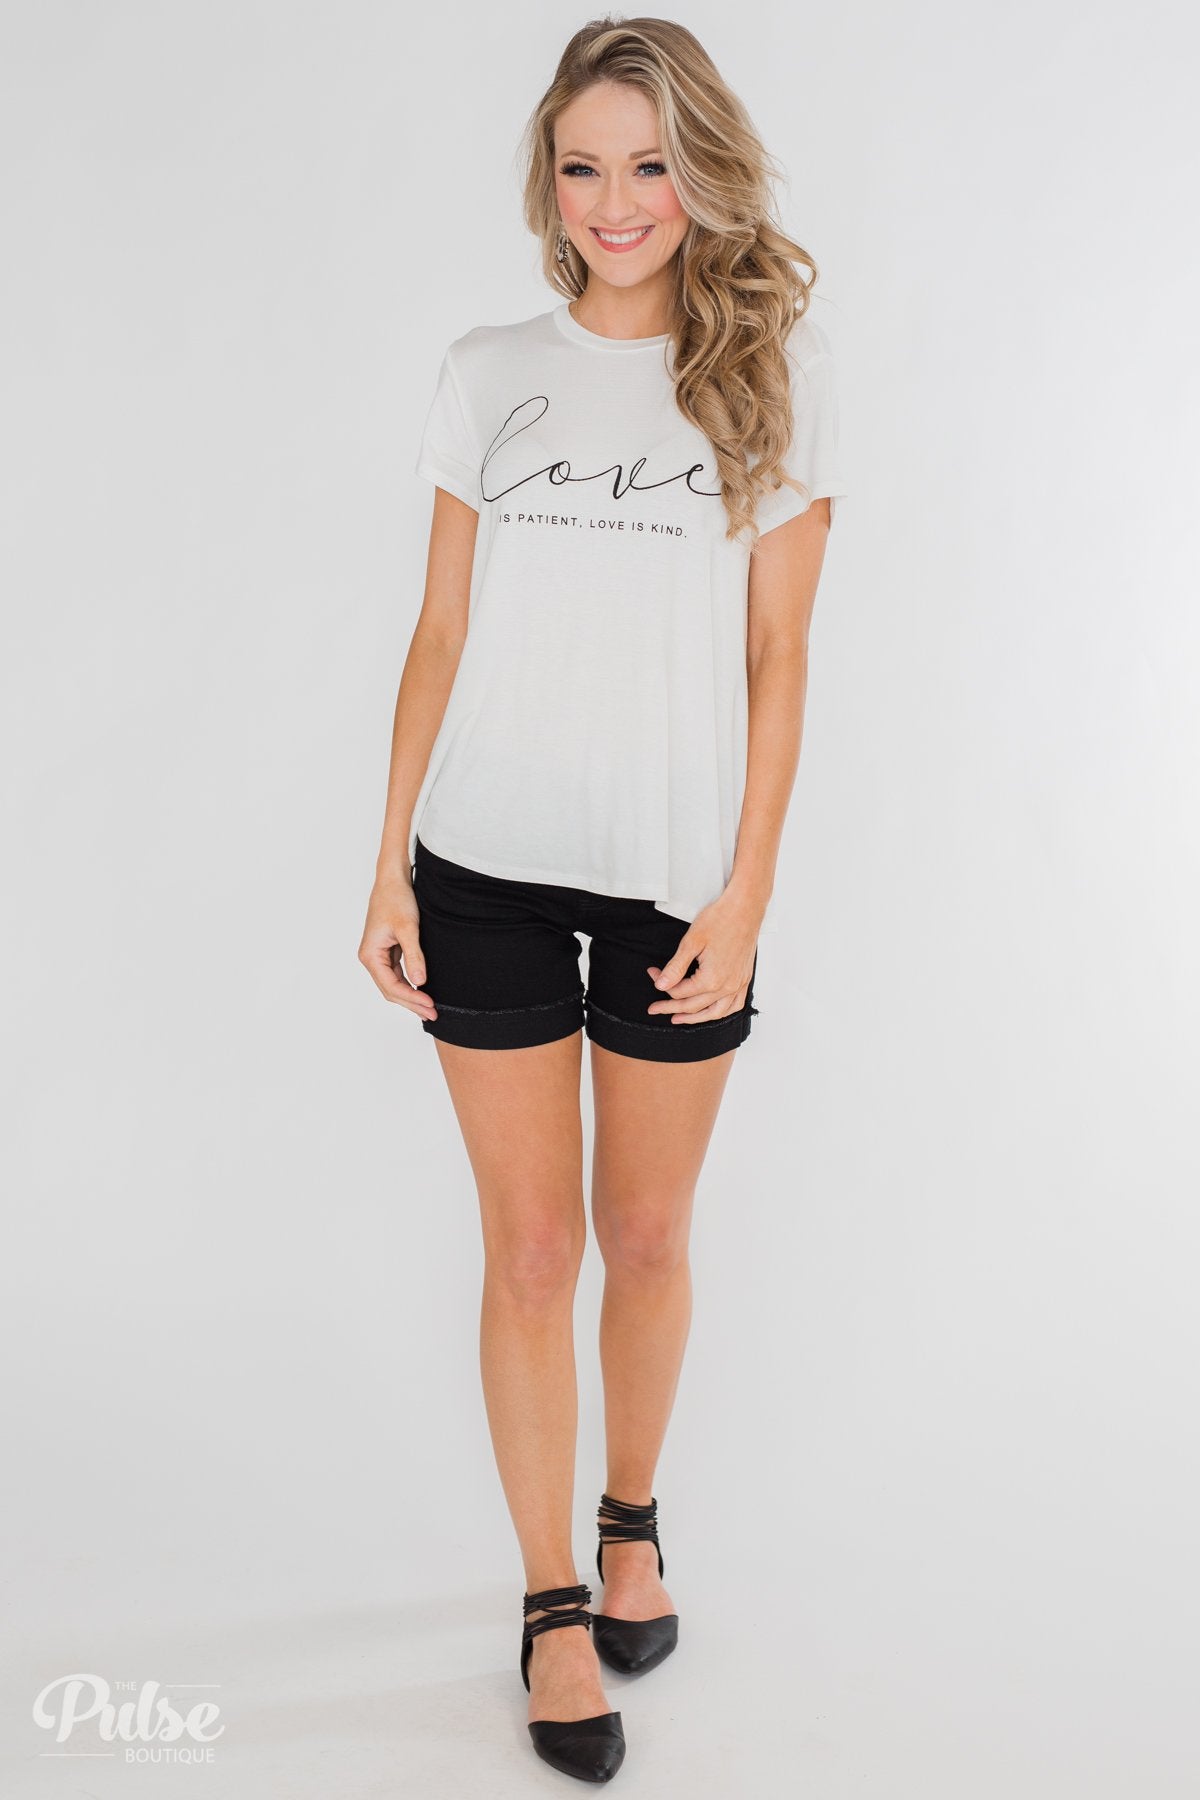 "Love Is Patient, Love Is Kind" Short Sleeve Top- Ivory